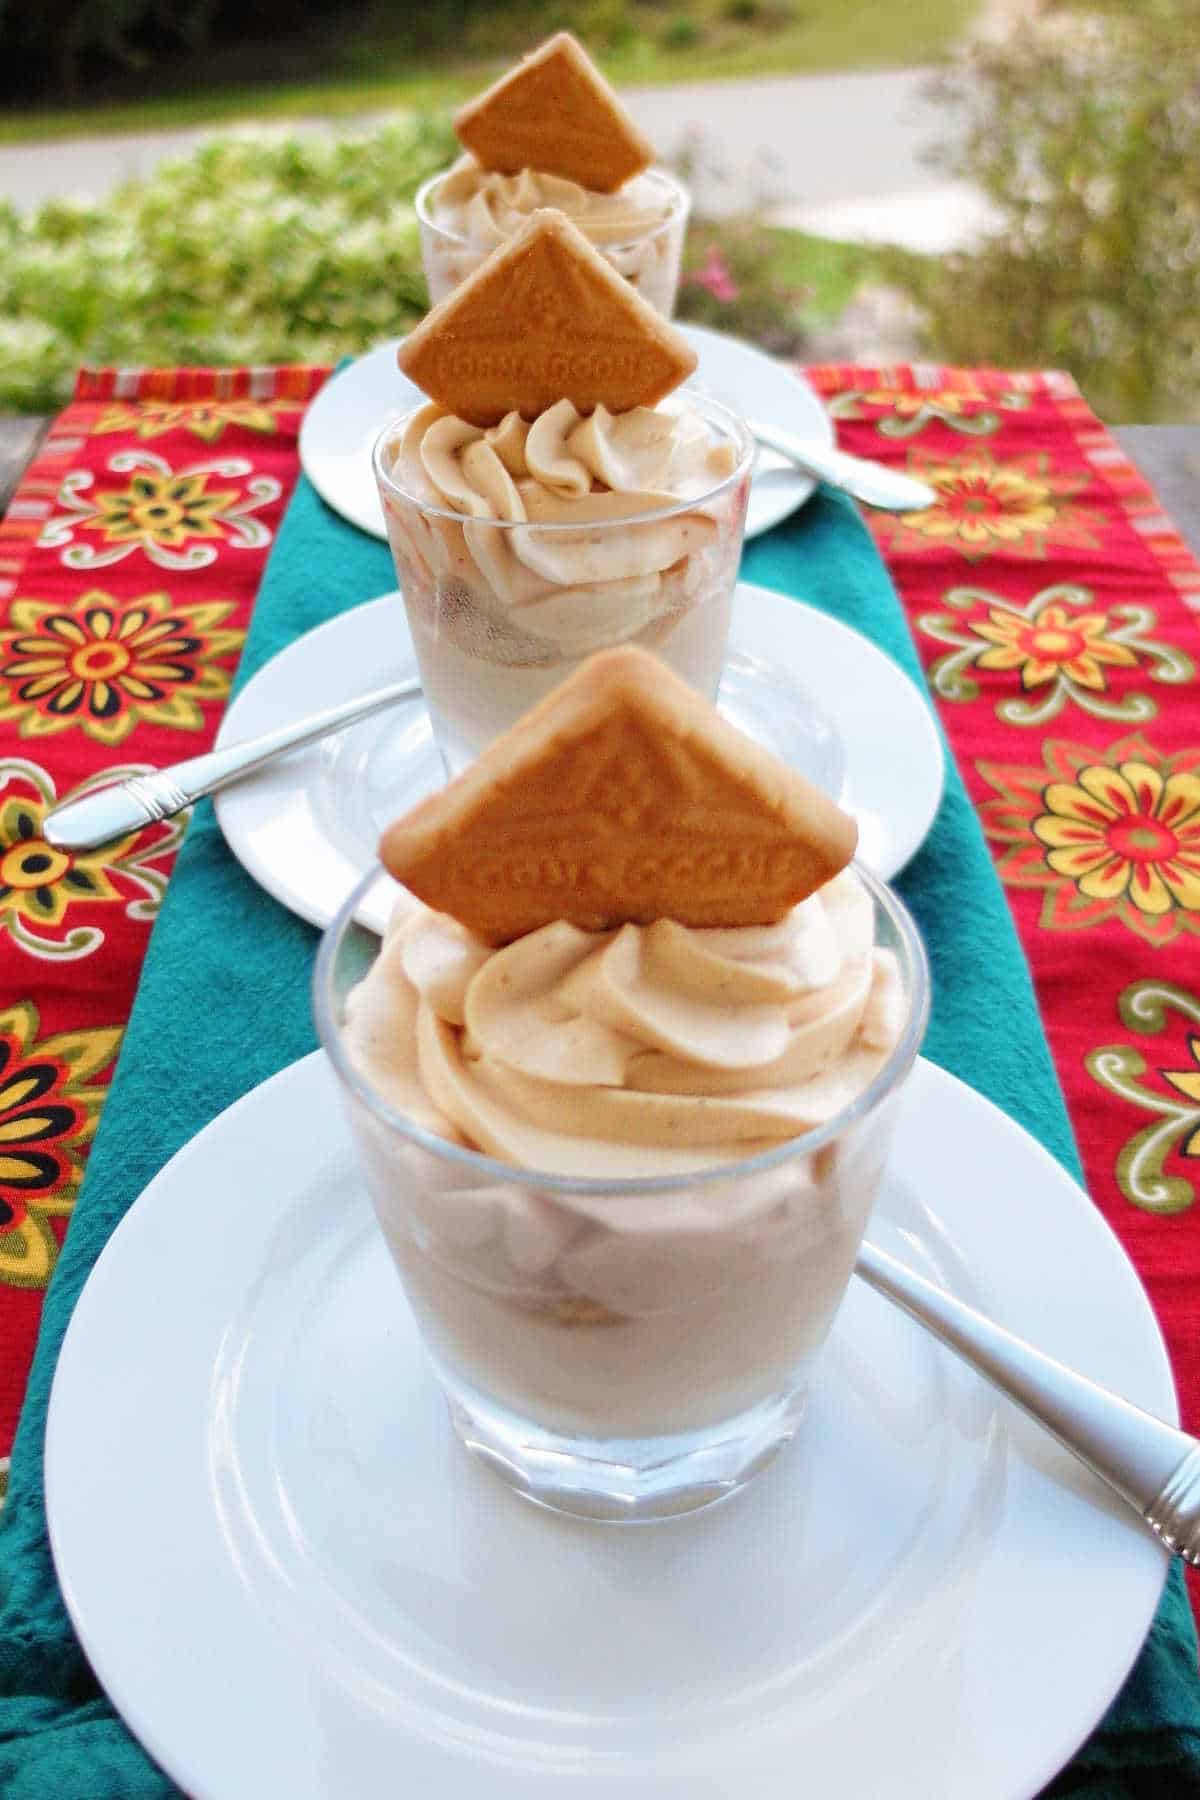 Three small glasses filled with roasted banana pudding and topped with a Lorna Doone cookie.